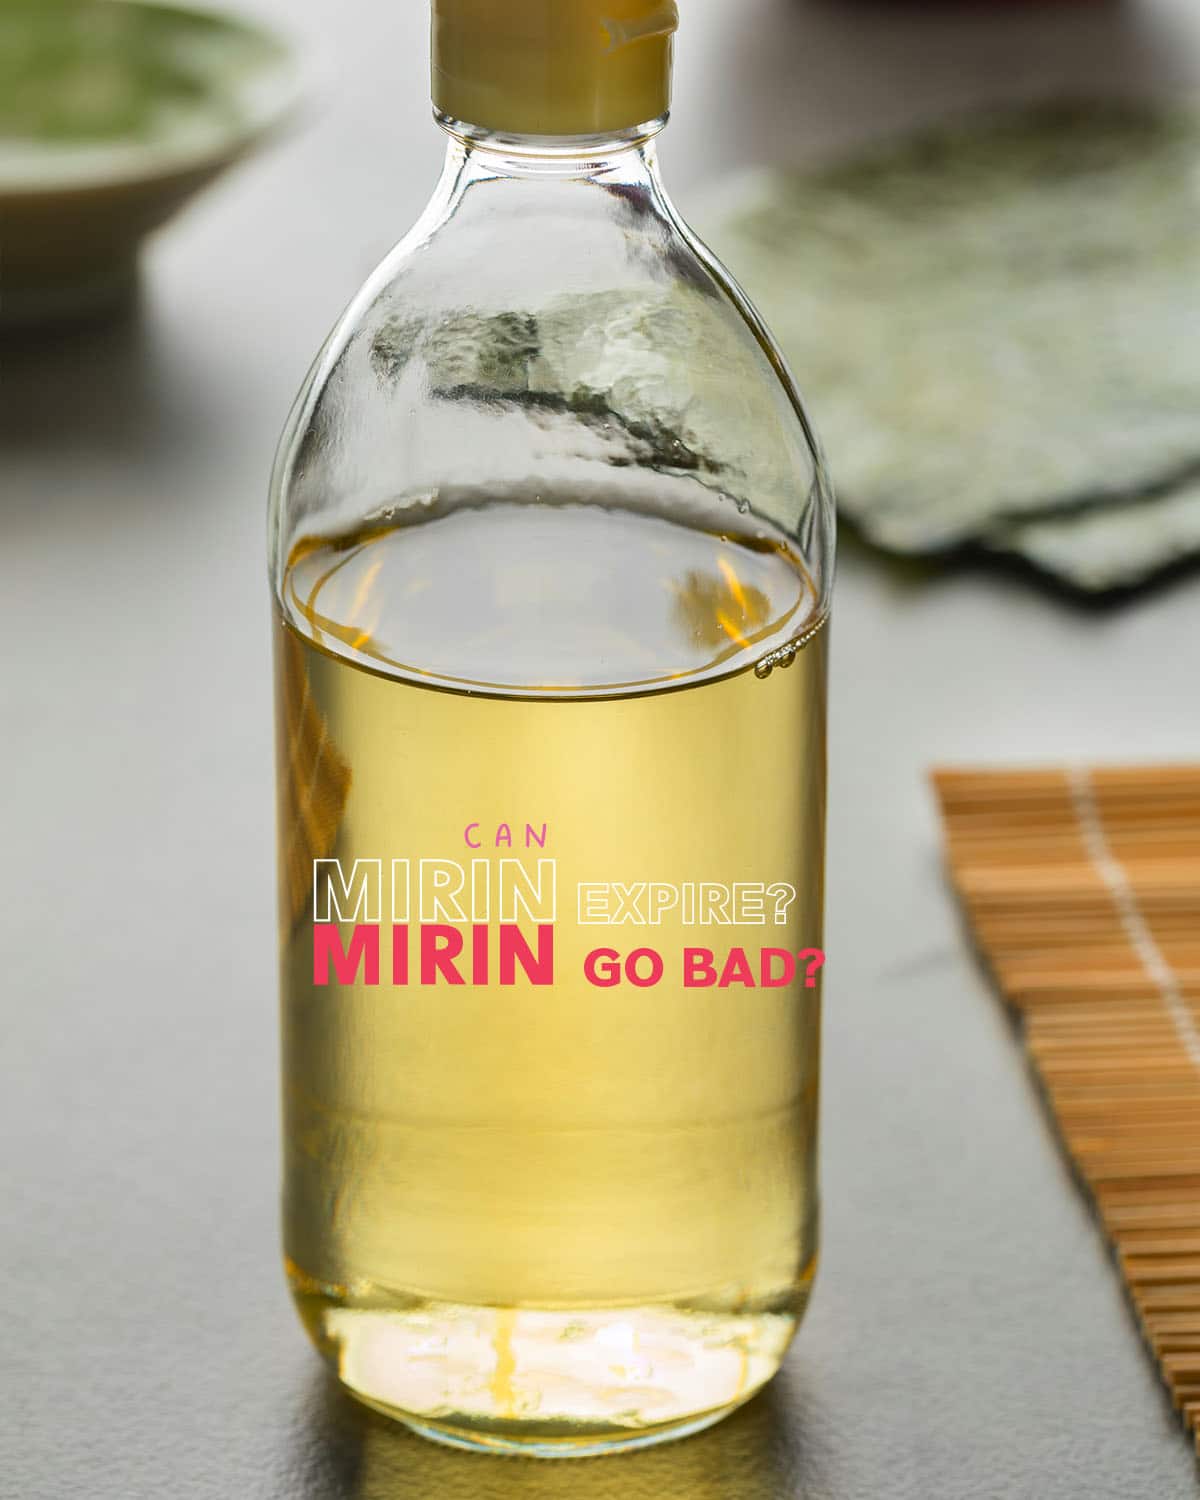 Both opened and unopened, Mirin stays fresh for a long time refrigerated, but the taste begins to fade two months after opening.